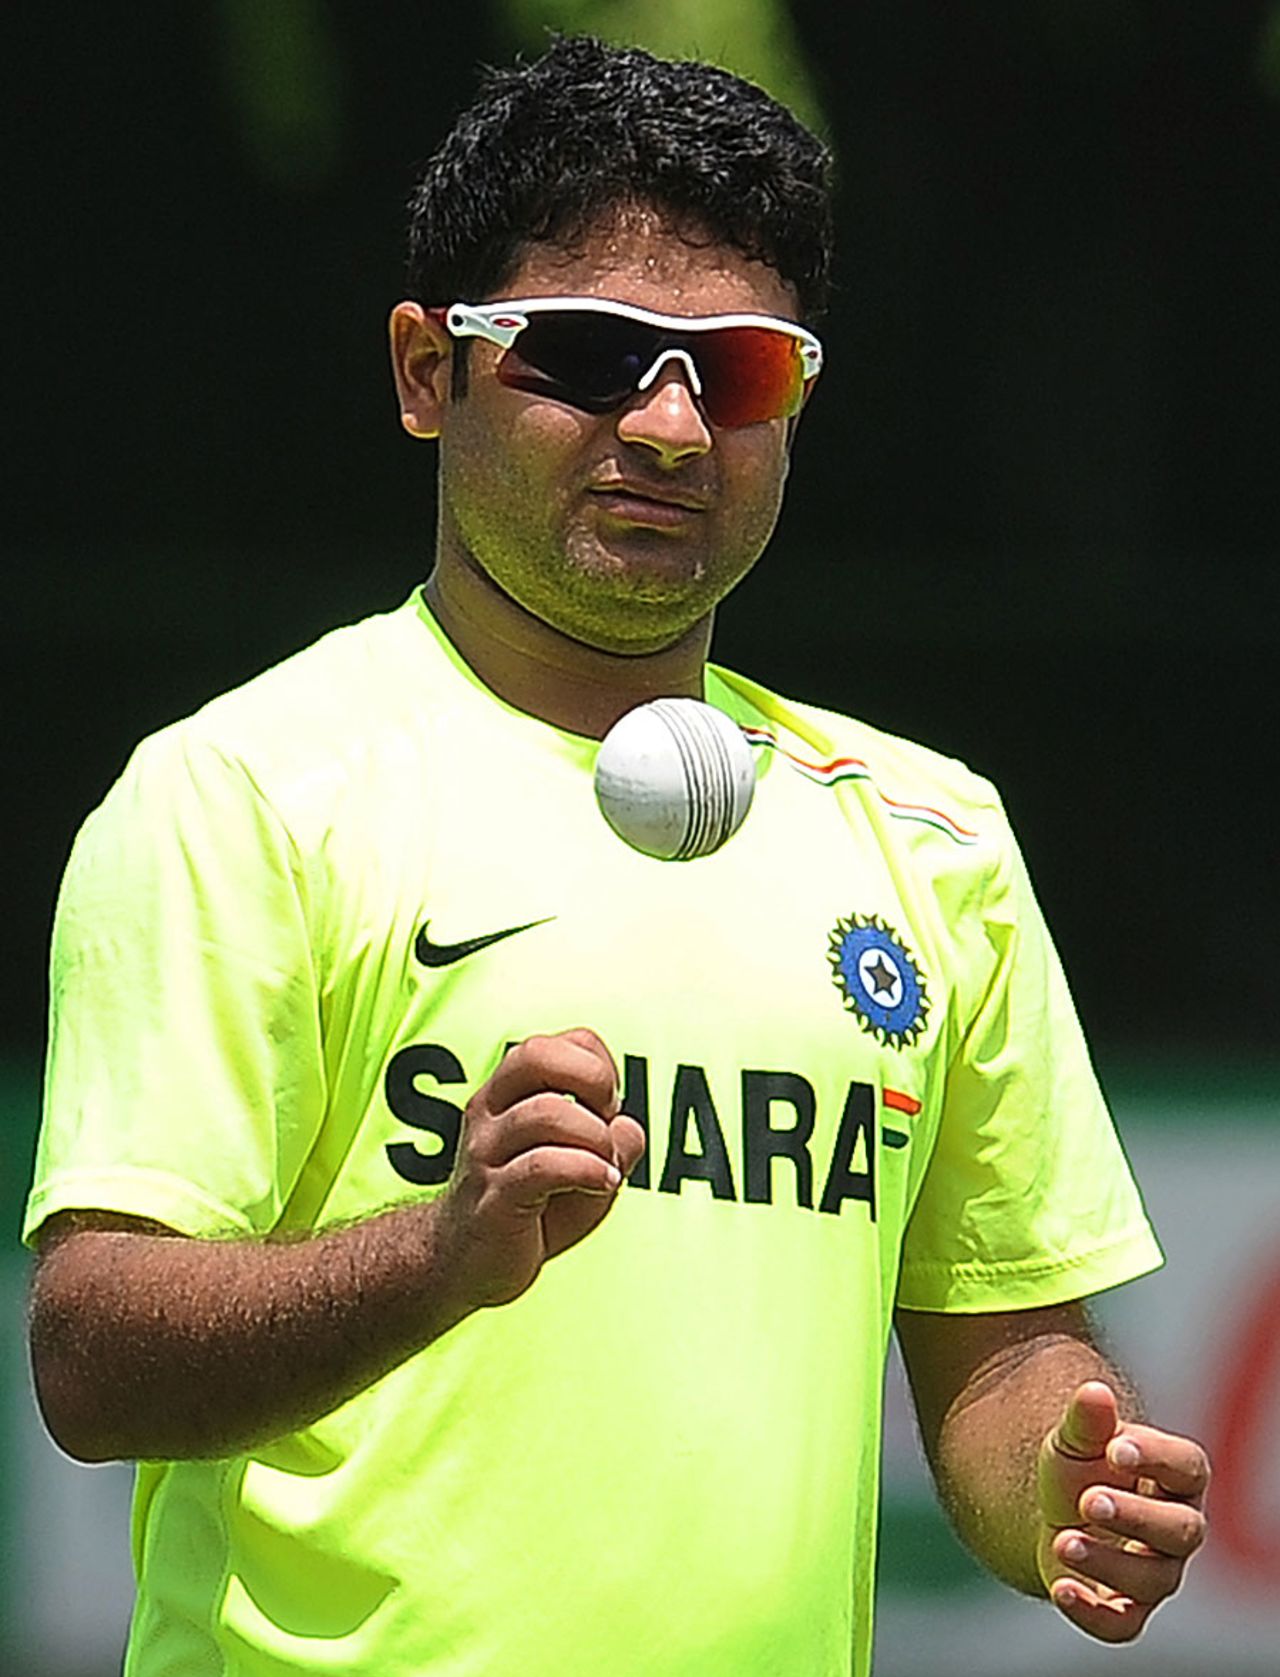 Piyush Chawla gets ready to bowl at the nets, Colombo, September 25, 2012